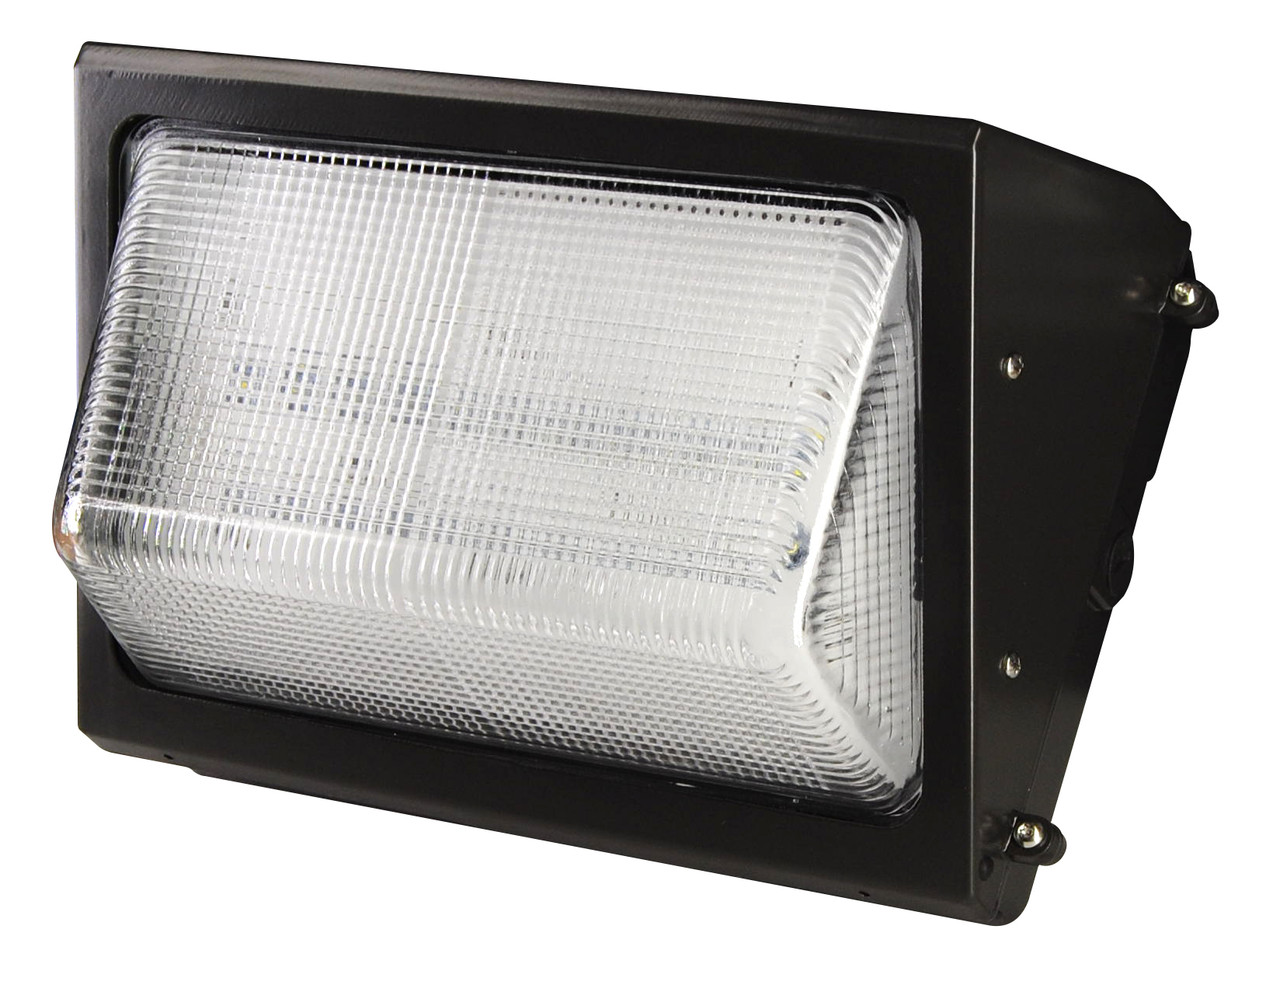 LED WALL PACK 80 WATTS 4000K & 5000K - The LEDWP60W/80W are rugged, durable LED wall packs, which are perfect for outdoor perimeter and area lighting. With die cast aluminum housings and vandal resistant, borosilicate glass lenses, the LEDWP60W/80W will stand up to many years of punishing environmental conditions. High-efficacy, long-life LEDs provide both energy and maintenance cost savings compared to traditional, HID wall packs.

▪ Available in 4000k (neutral white) and 5000k (cool white) color temperatures.*
▪ Long-life LEDs provide 59,000 hours of operation (LEDWP60W), or 57,000 hours of operation (LEDWP80W) with at least 70% of initial lumen output (L70).**
▪ LEDWP60W models deliver 5,498 lumens and 96 lumens per watt (LPW) at both 4000k and 5000k.*
▪ LEDWP80W models deliver 7,585 lumens and 100 LPW at both 4000k and 5000k.*
▪ Uniform illumination with no visible LED pixilation.
▪ Universal 120-277 AC voltage (50-60Hz) is standard.
▪ Power factor > 0.90.
▪ Total harmonic distortion < 20%.
▪ Color rendering index > 80.
▪ Die cast aluminum housing with durable, dark bronze, powder coat paint.
▪ Tempered, borosilicate glass lens with seamless, silicone gasket to prevent leaks.
▪ Removable, threaded plugs for side attachment of ½” rigid electrical conduit, or for button photocells.
▪ Easy installation in new construction or retrofit.